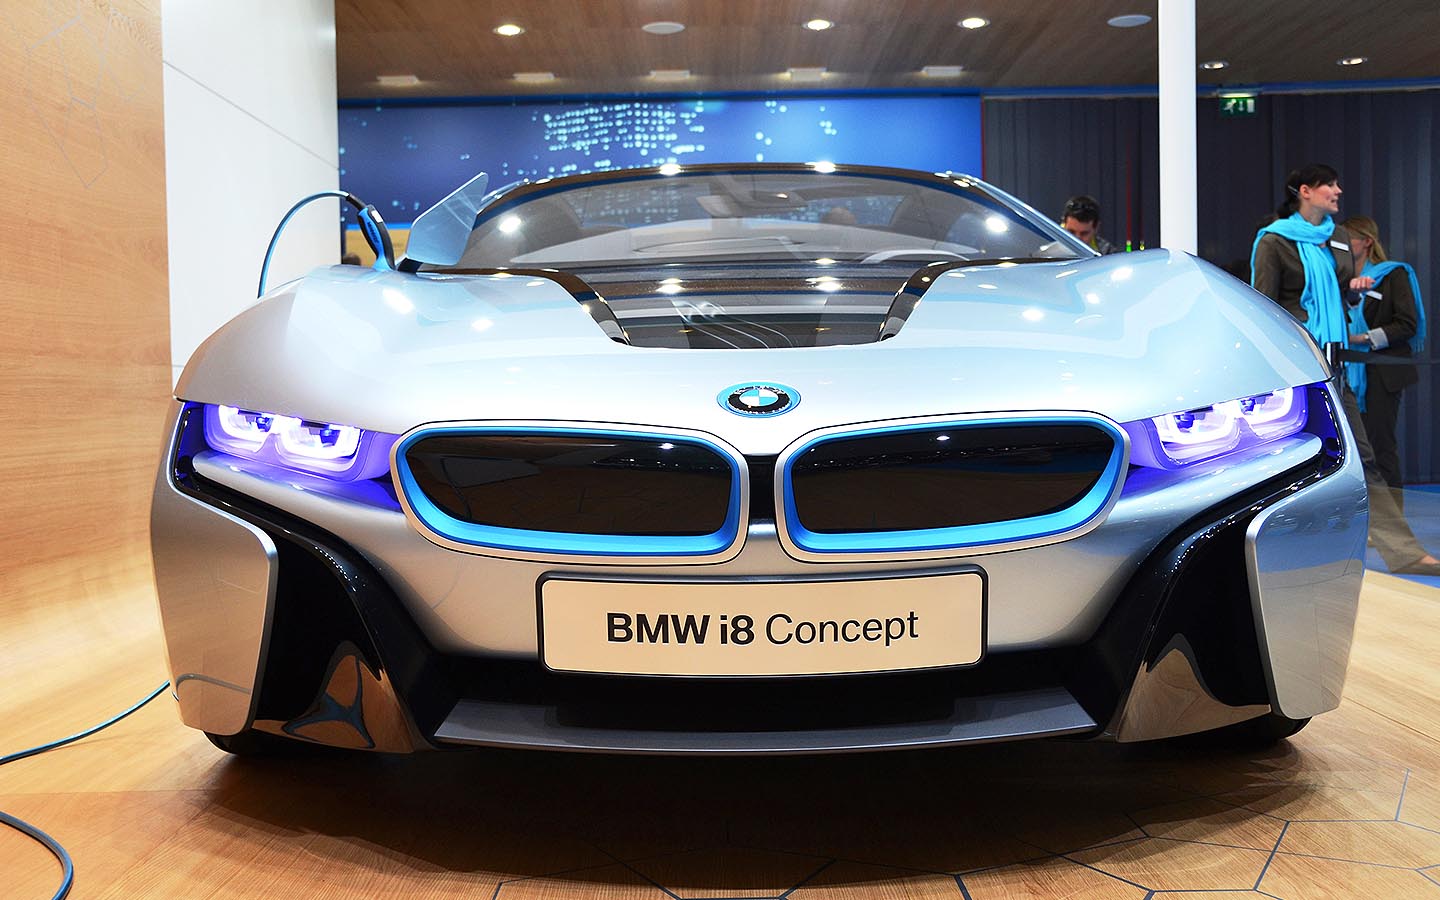 BMW I vision Dee is one of the brand's concept car